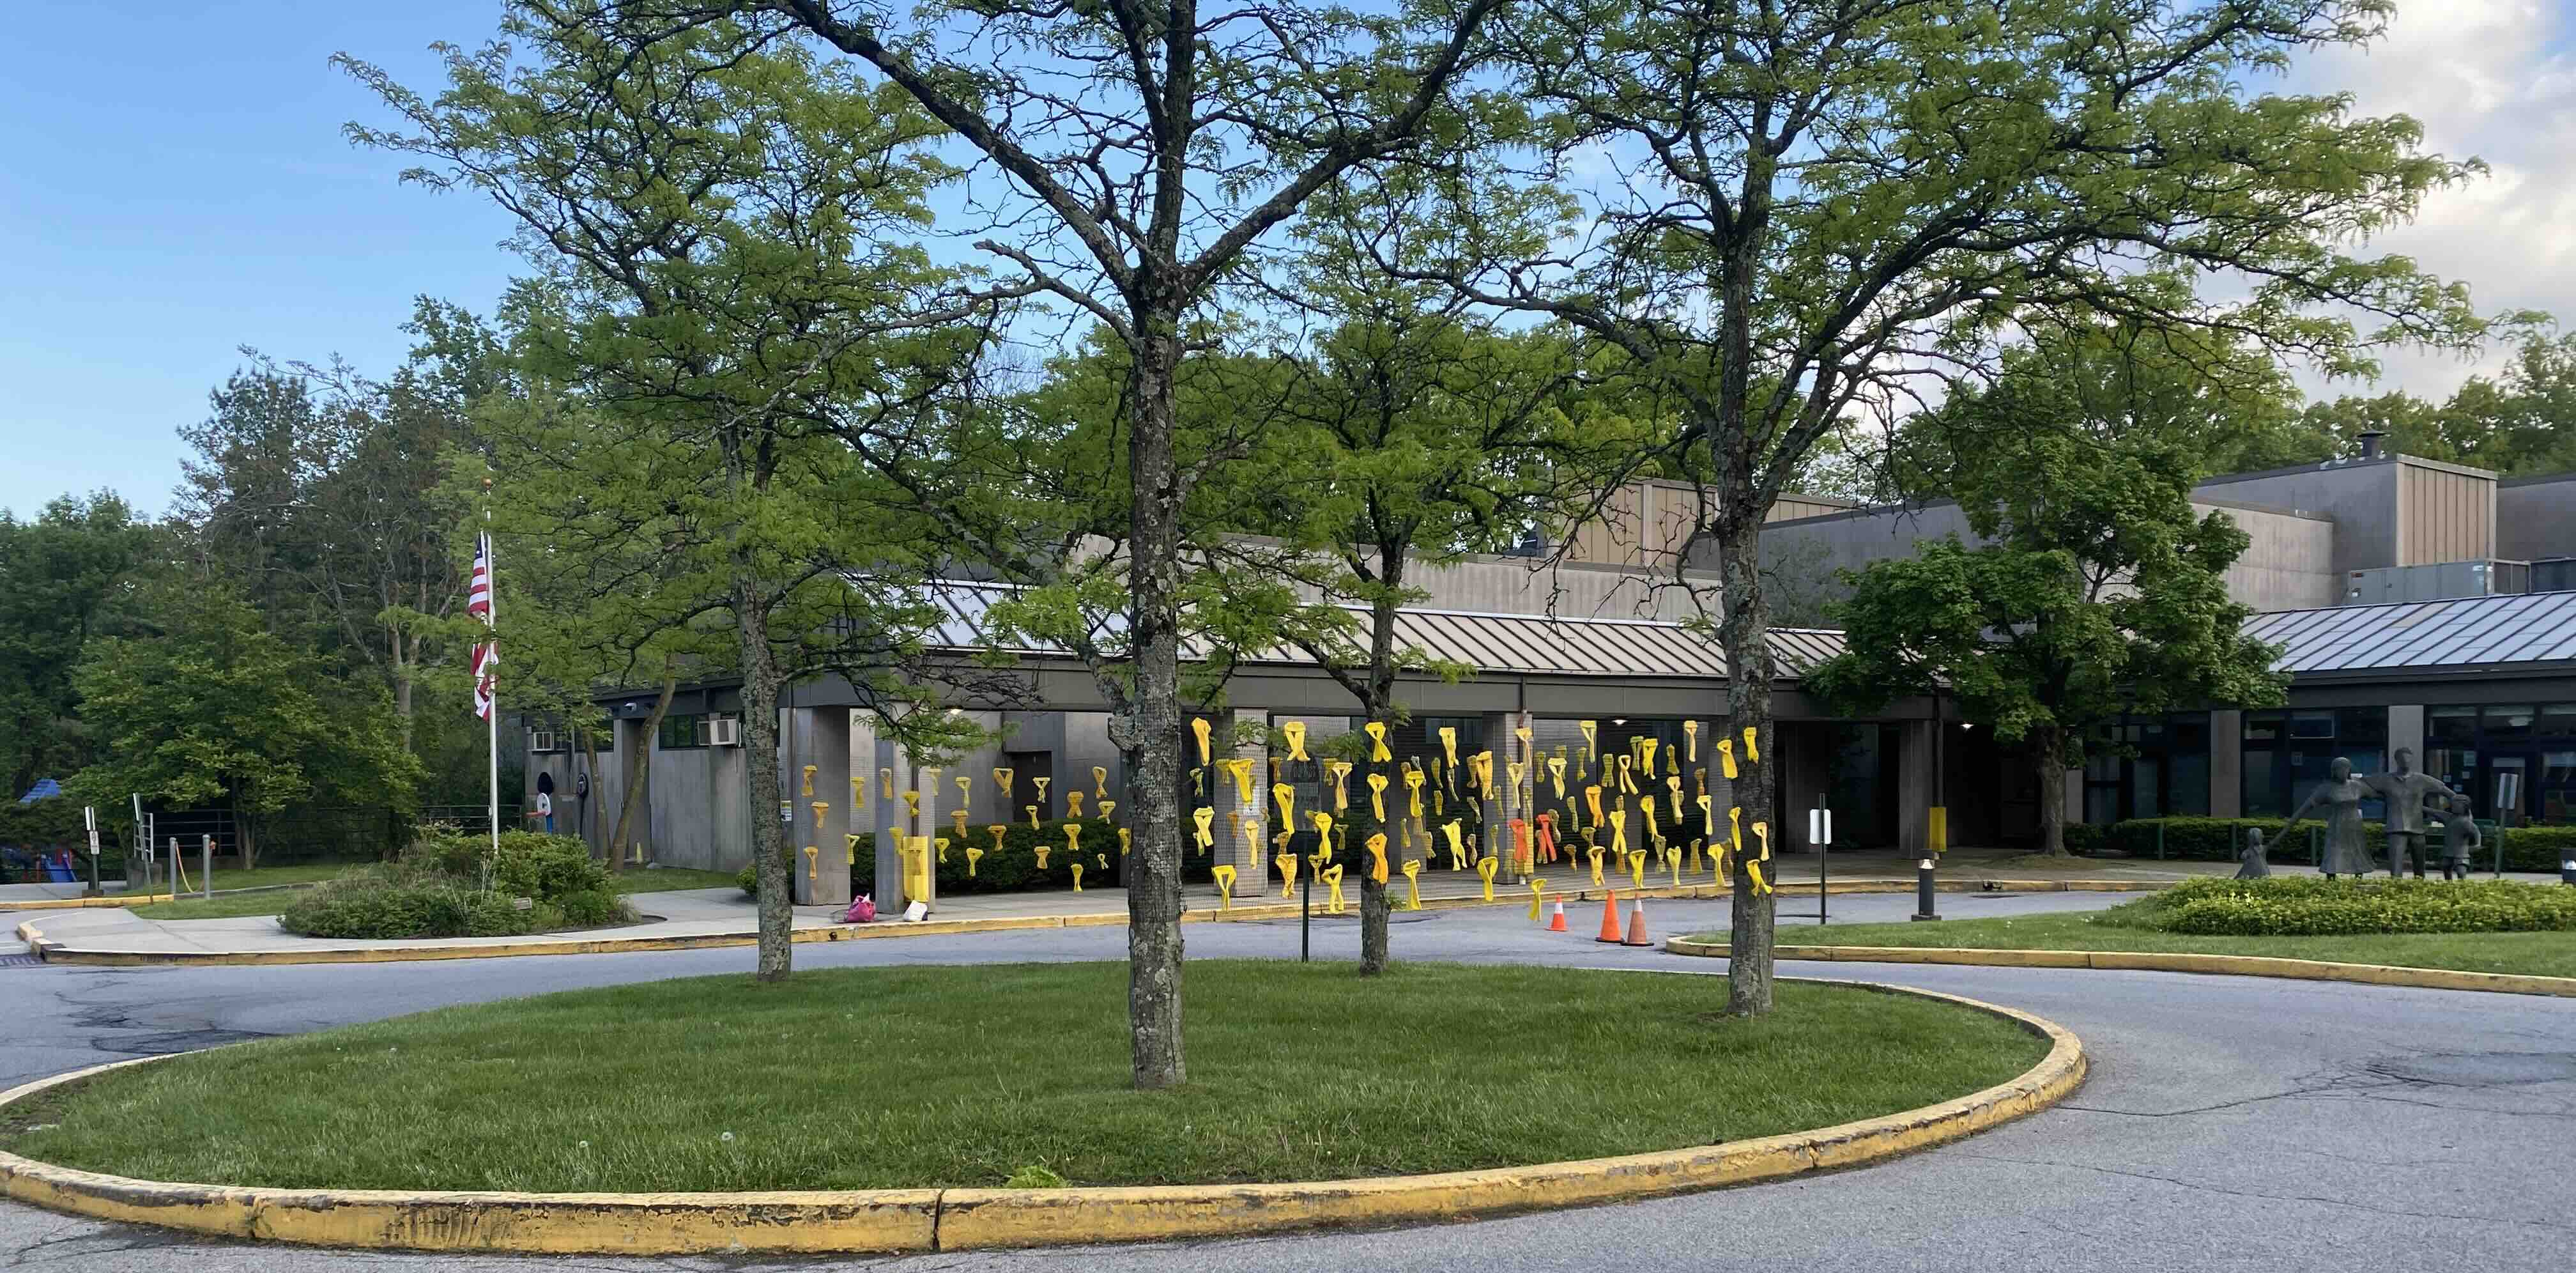 Ribbons on display outside of a building